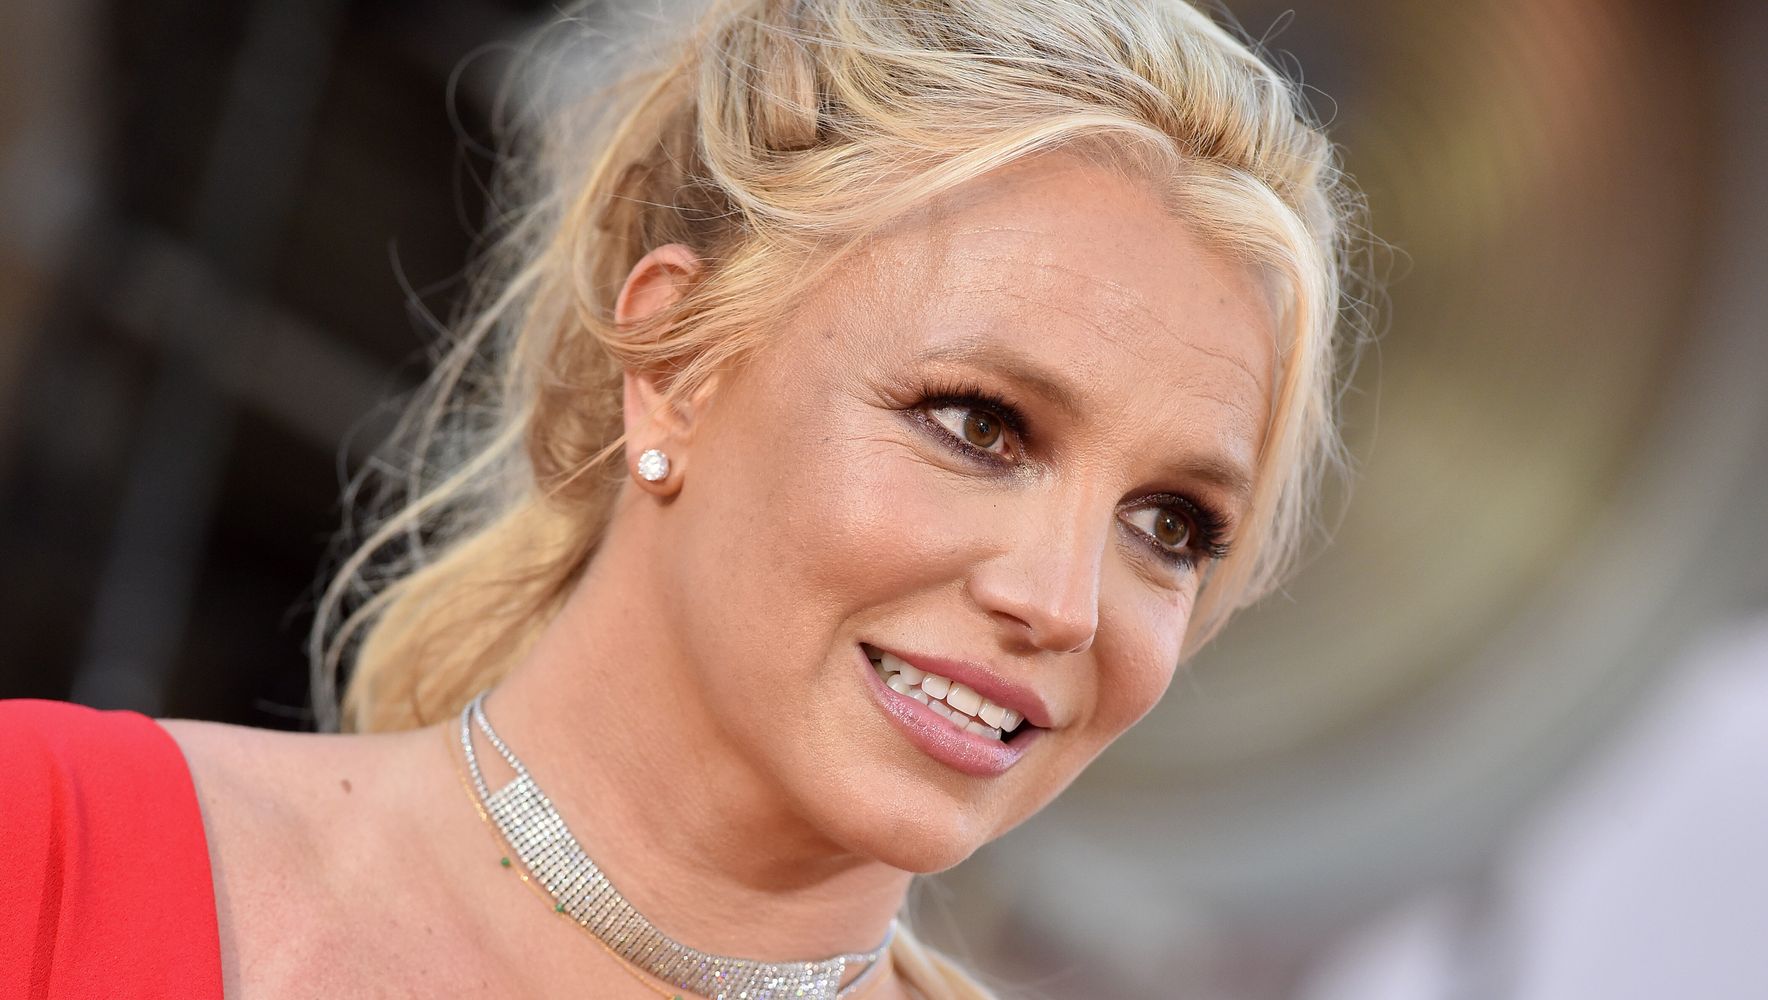 5 Alarming Claims From Britney Spears' Testimony, Including Forced IUD Use